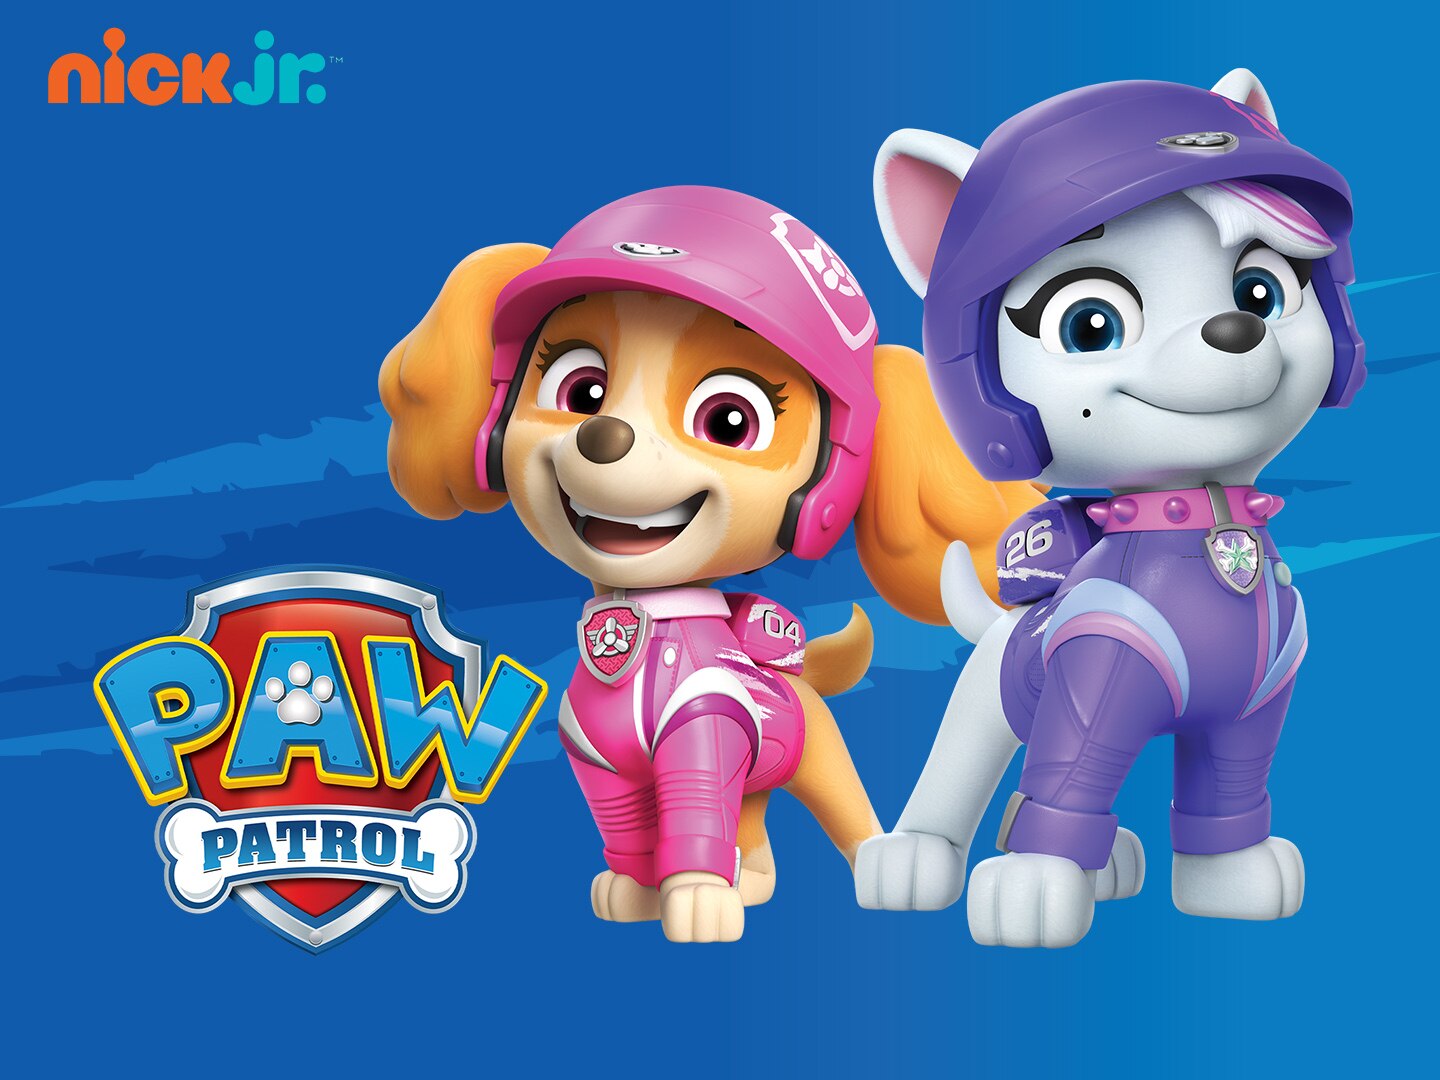 Paw Patrol Ready for Action Poster 61x91.5cm